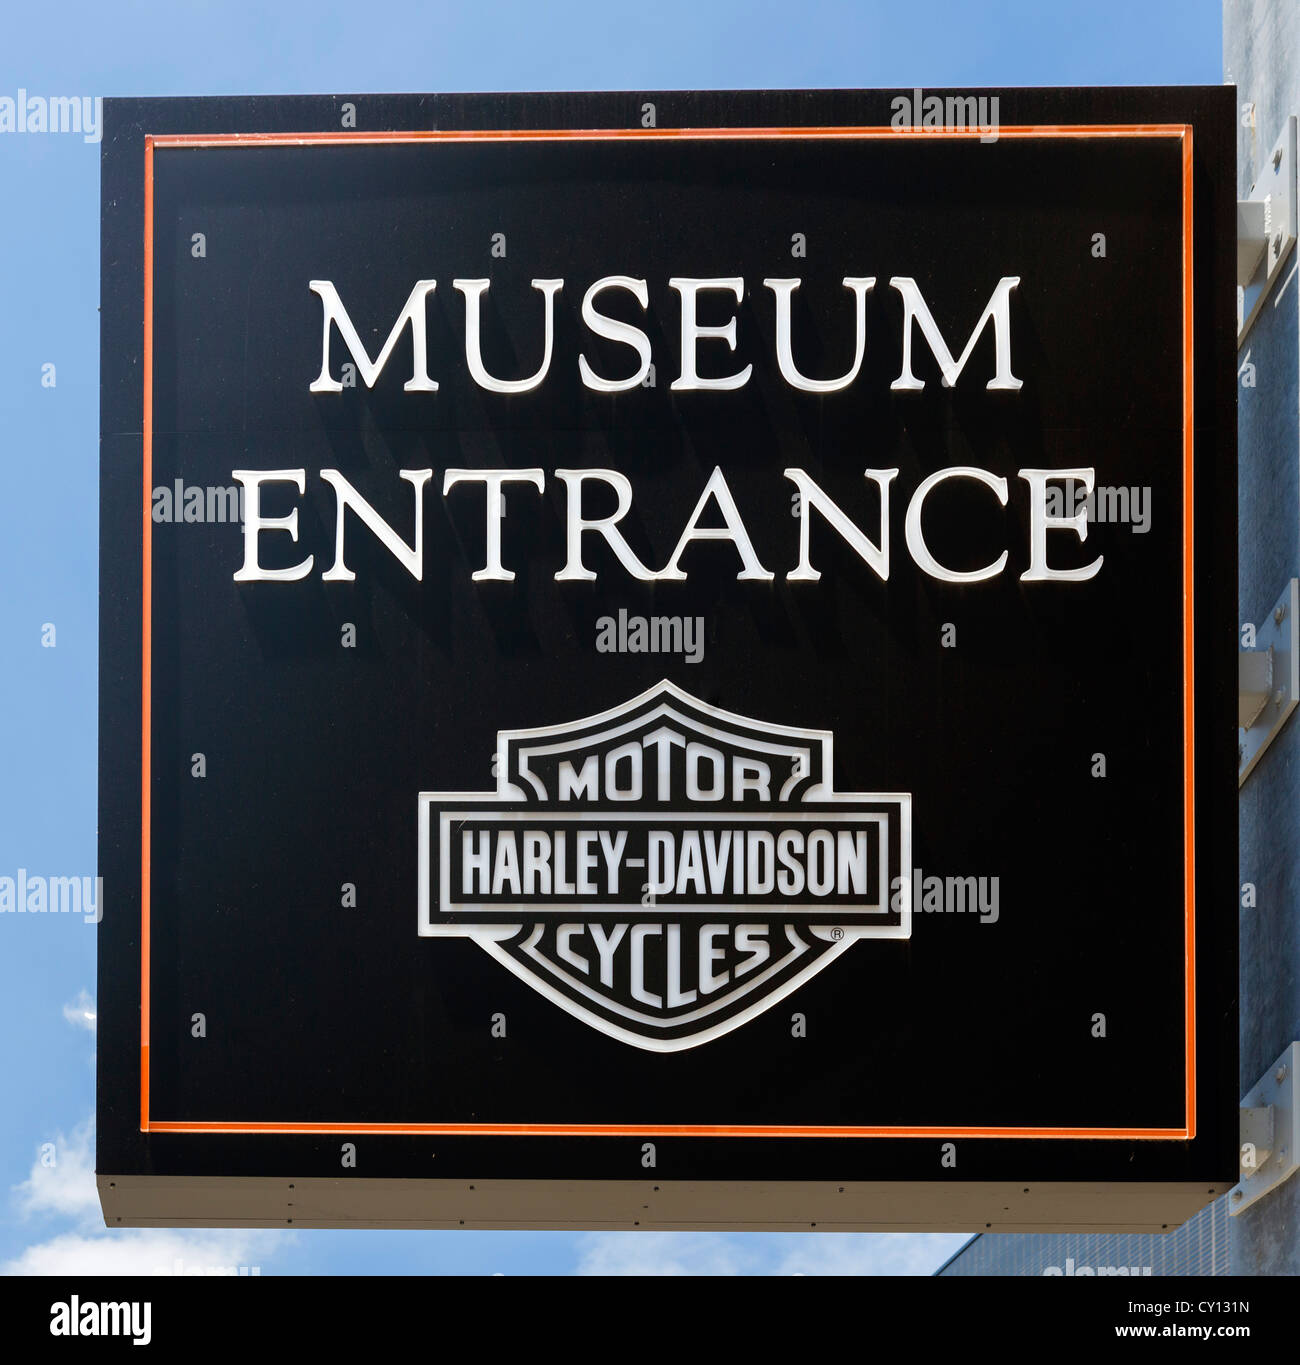 Entrance sign to the Harley Davidson Museum with Harley Davidson motorcycles parked outside, Milwaukee, Wisconsin, USA Stock Photo